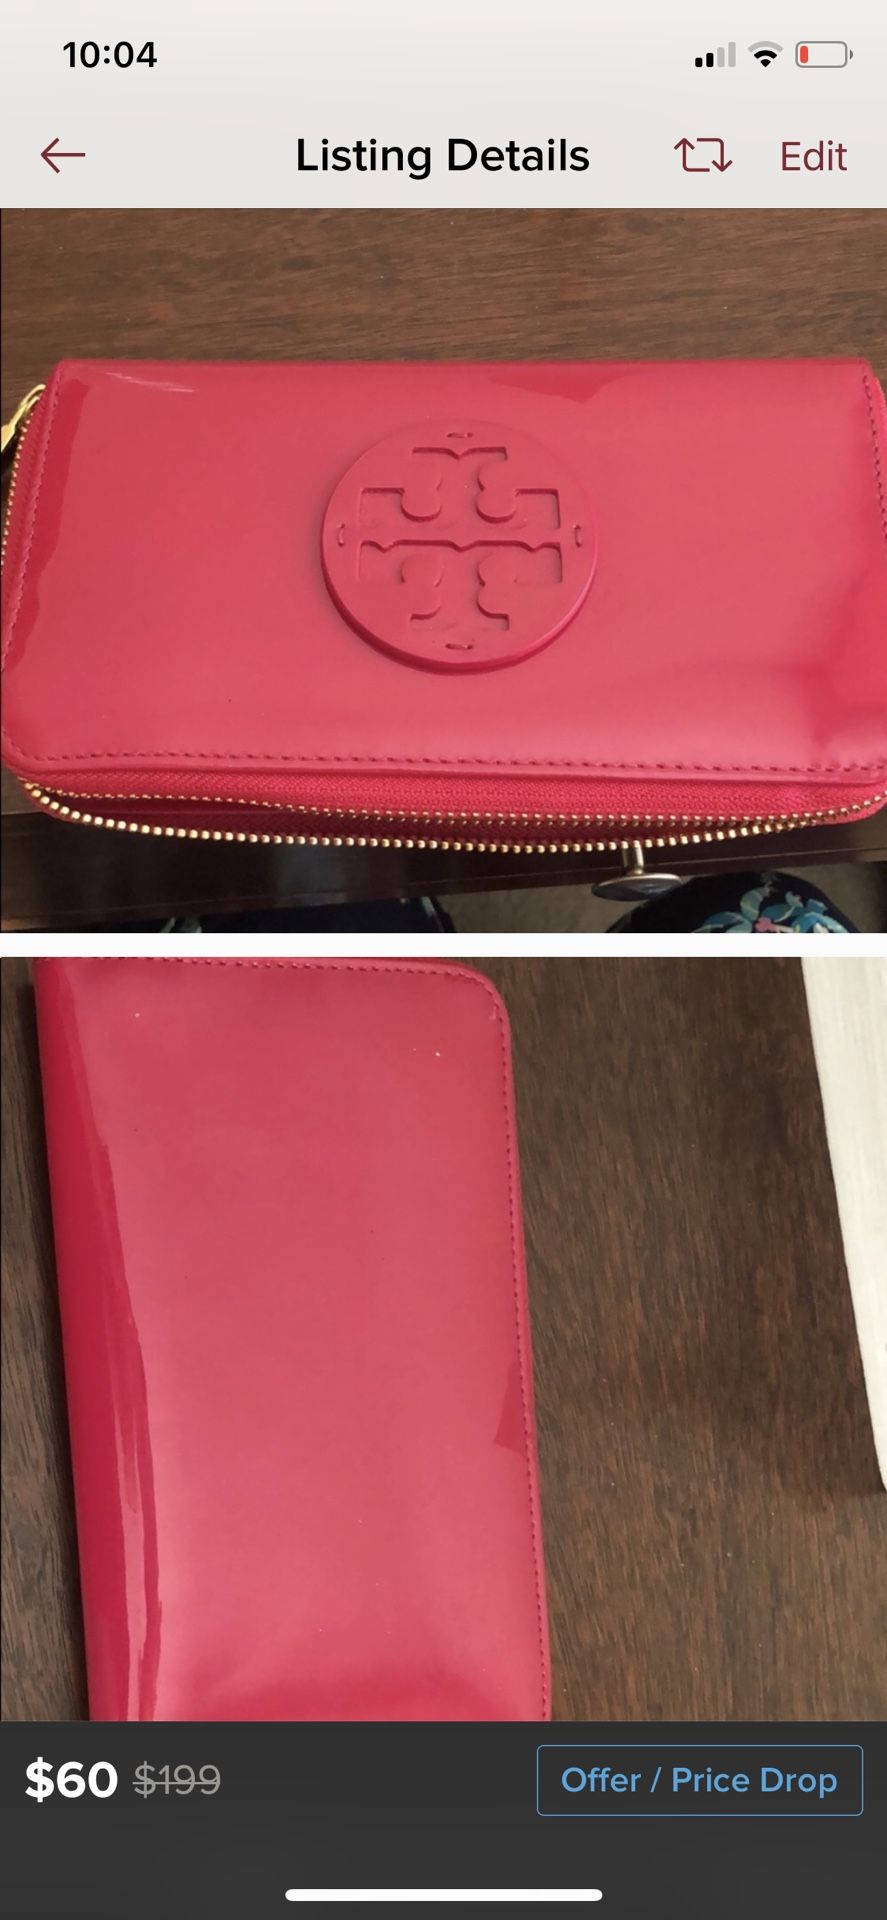 Gently used Tory Burch wallet